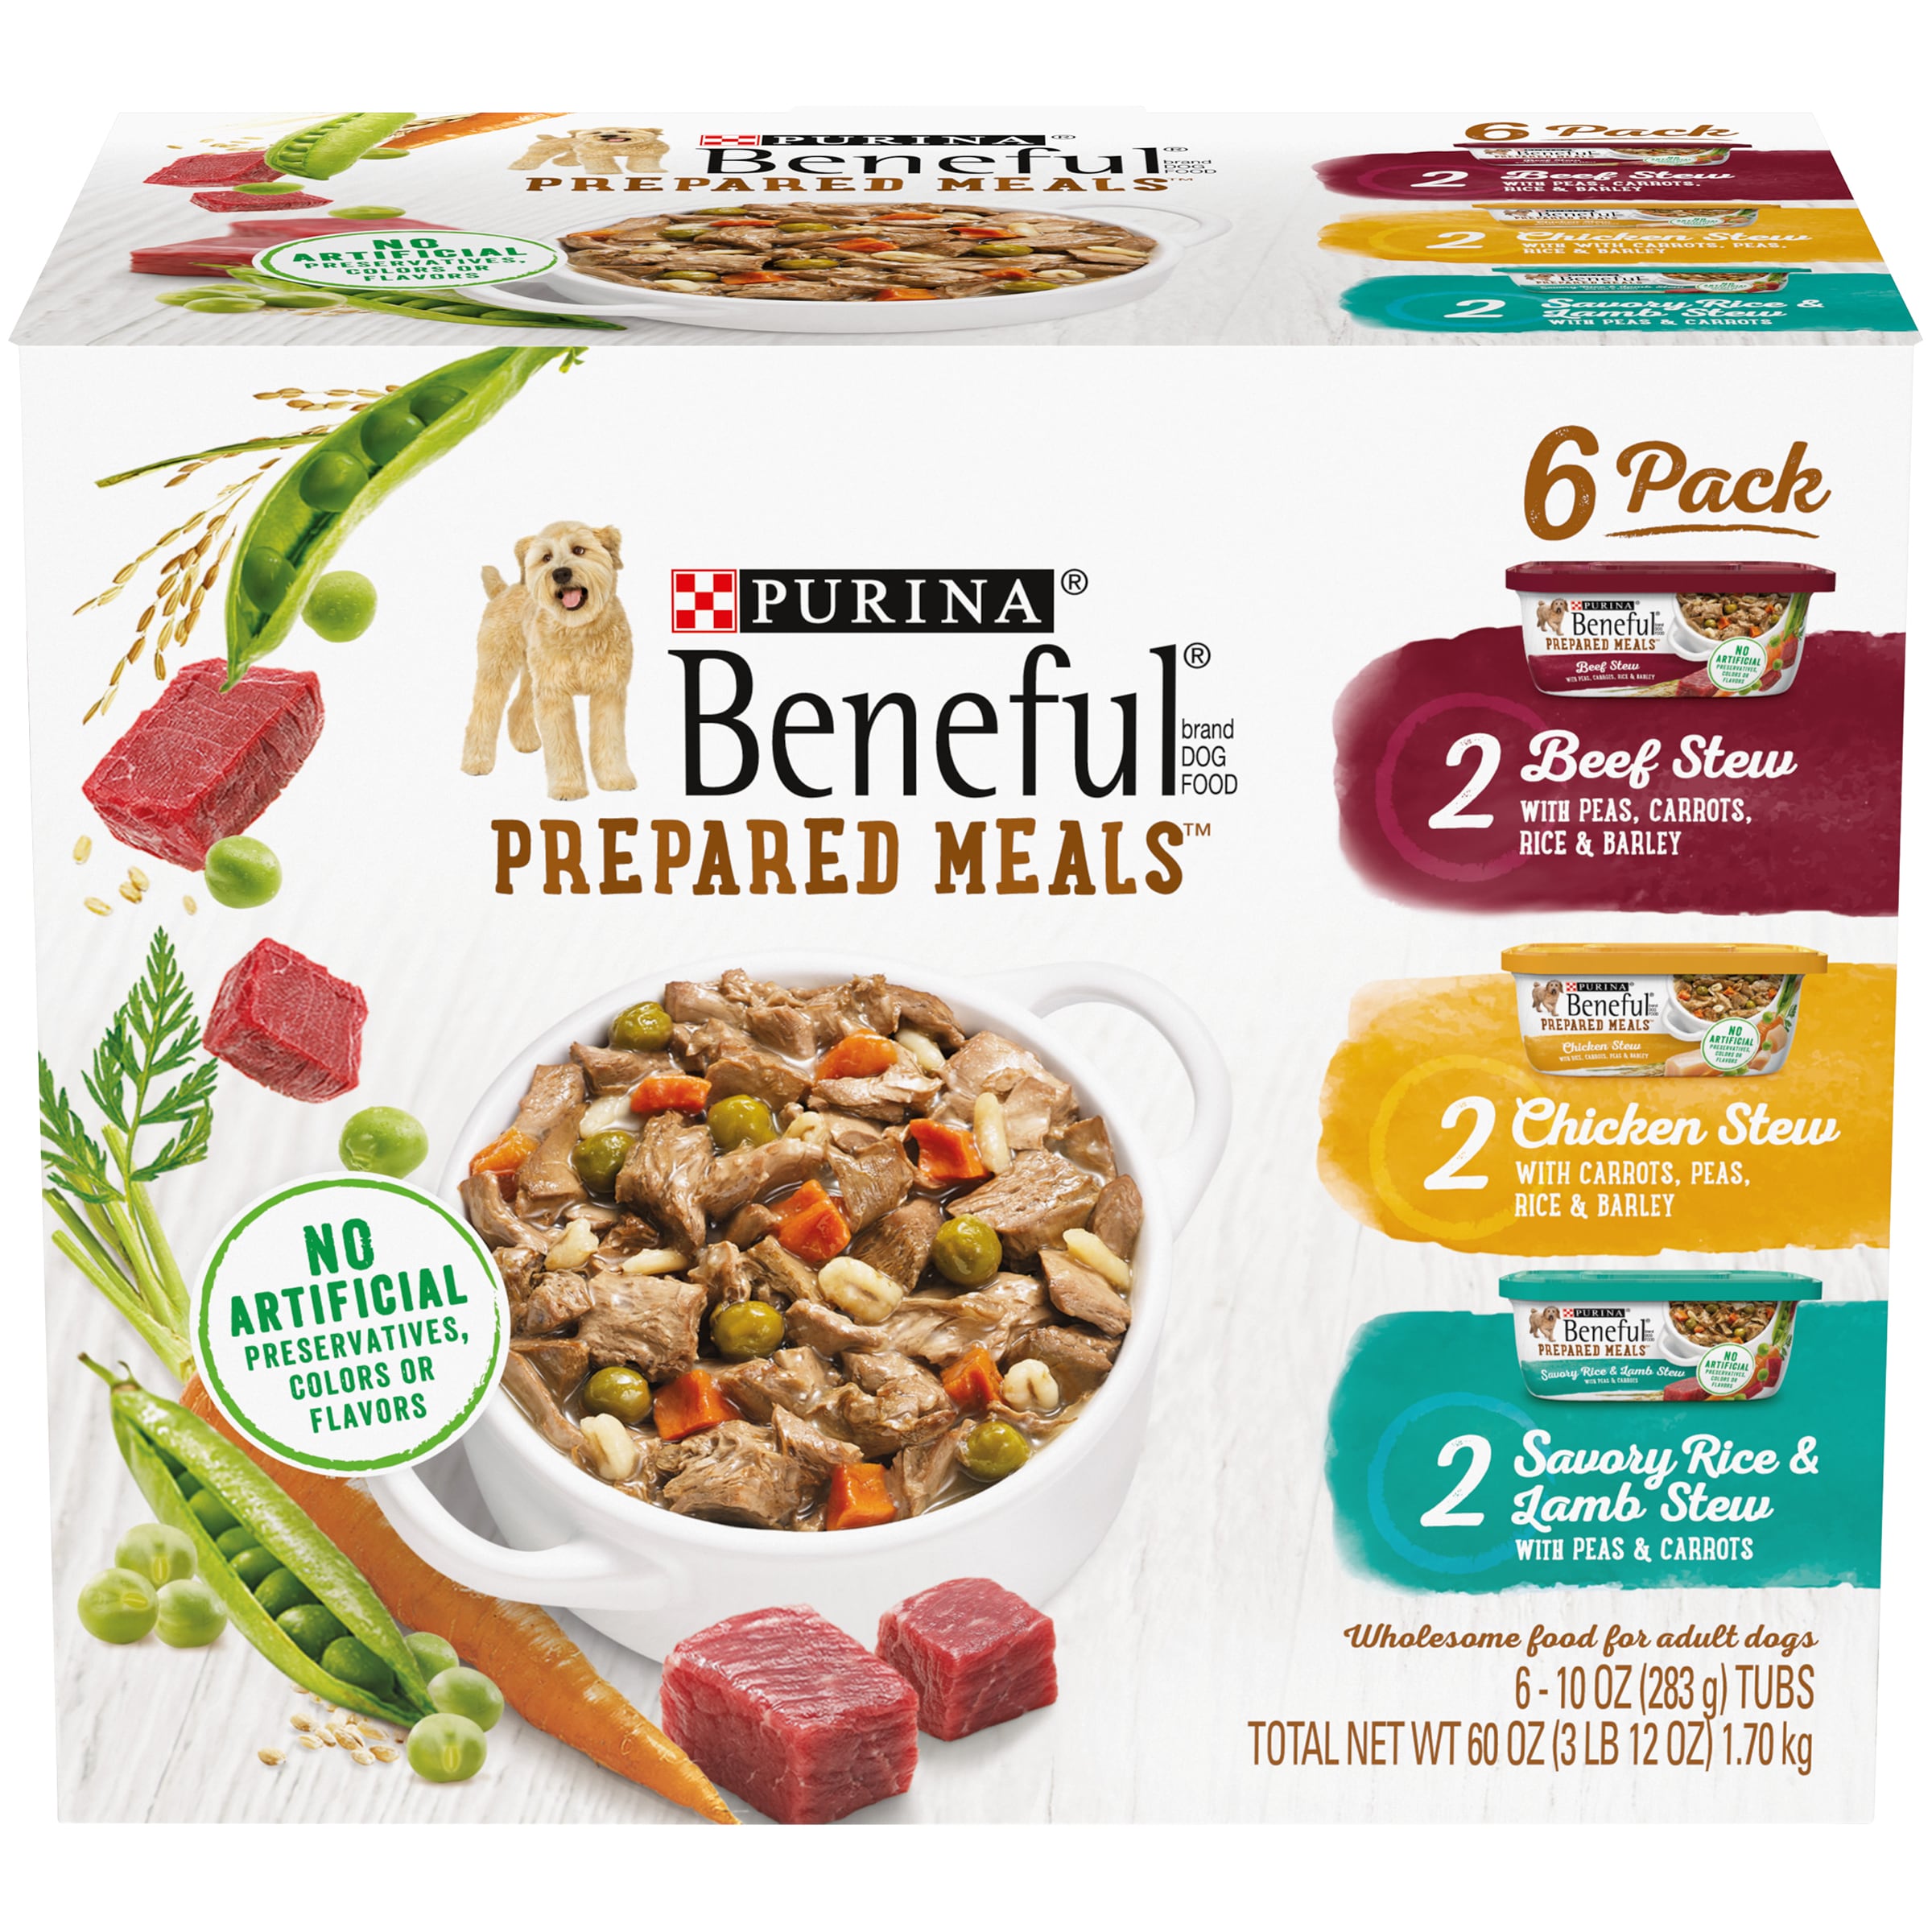 Nestle Purina Beneful Prepared Meals Variety Pack 6/10 oz - 2 Beef Stew, 2 Chicken Stew, 2 Lamb/Rice Stew - Adult Dog Food - Made in USA - Real Meat -  001780018805